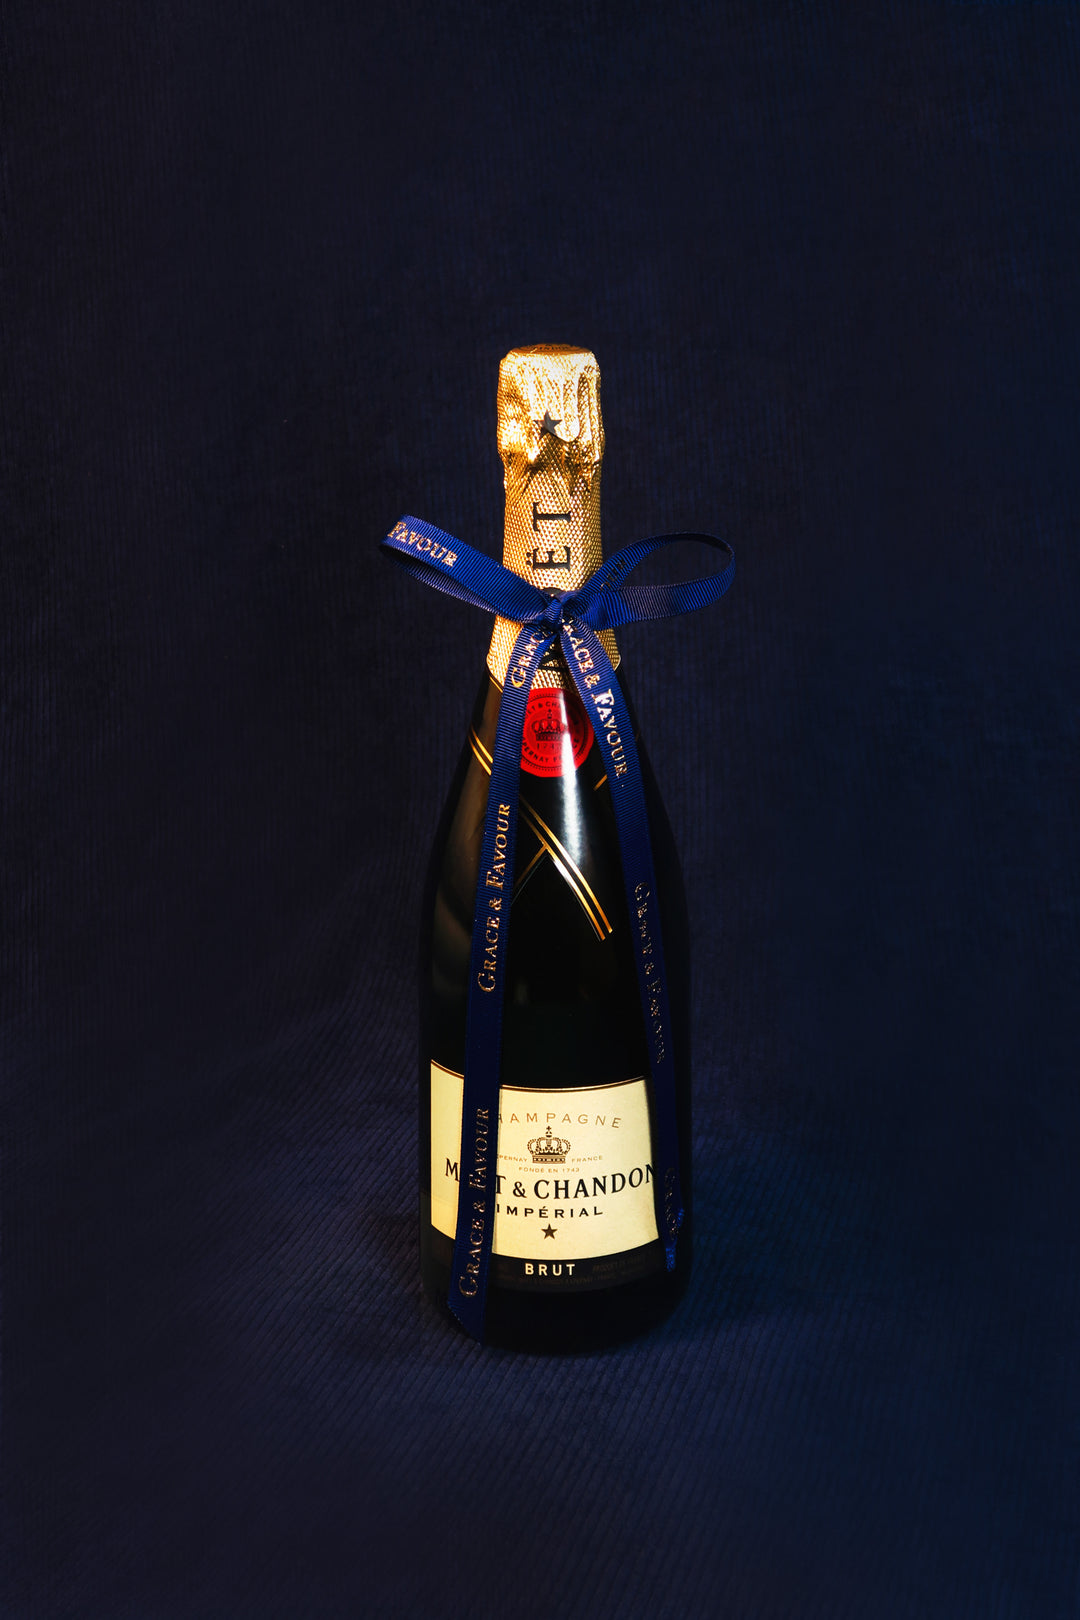 Add-on - Champagne - Moet Chandon